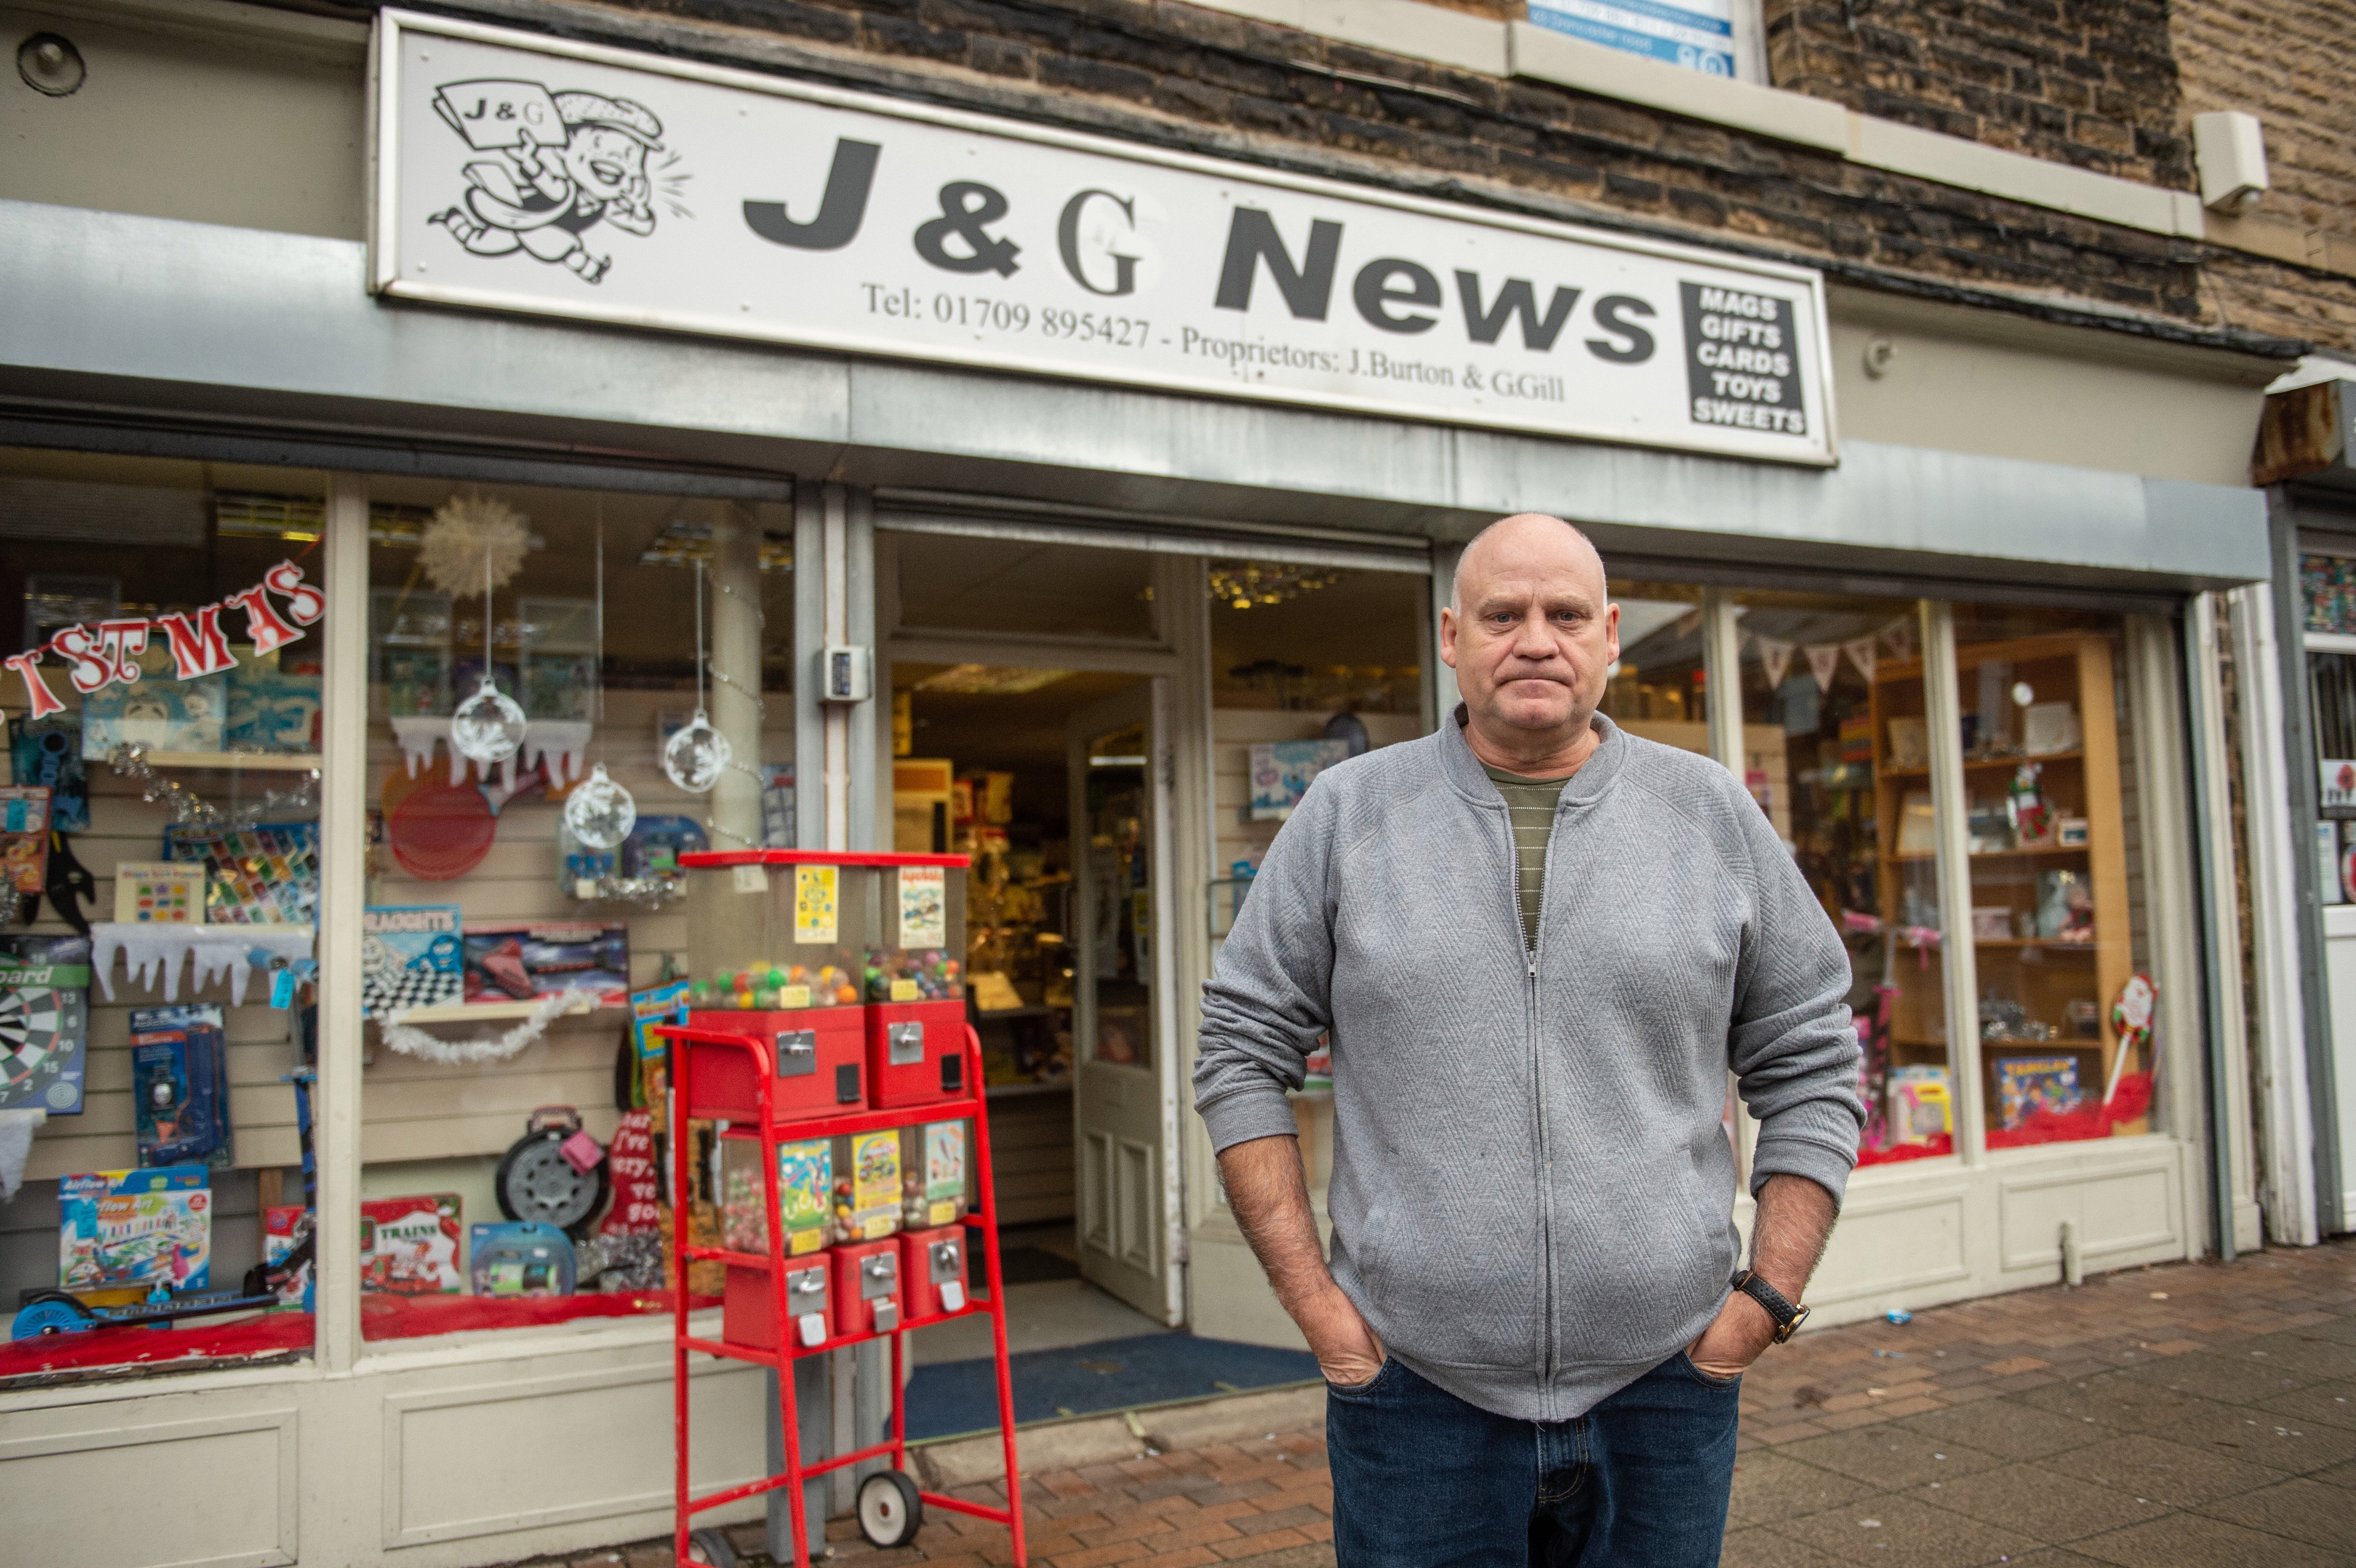  Former miner Graham Gill, 61, who runs Goldthorpe’s J&G News convenience store, says: 'It used to be bustling around here but look at it now — a ghost town'